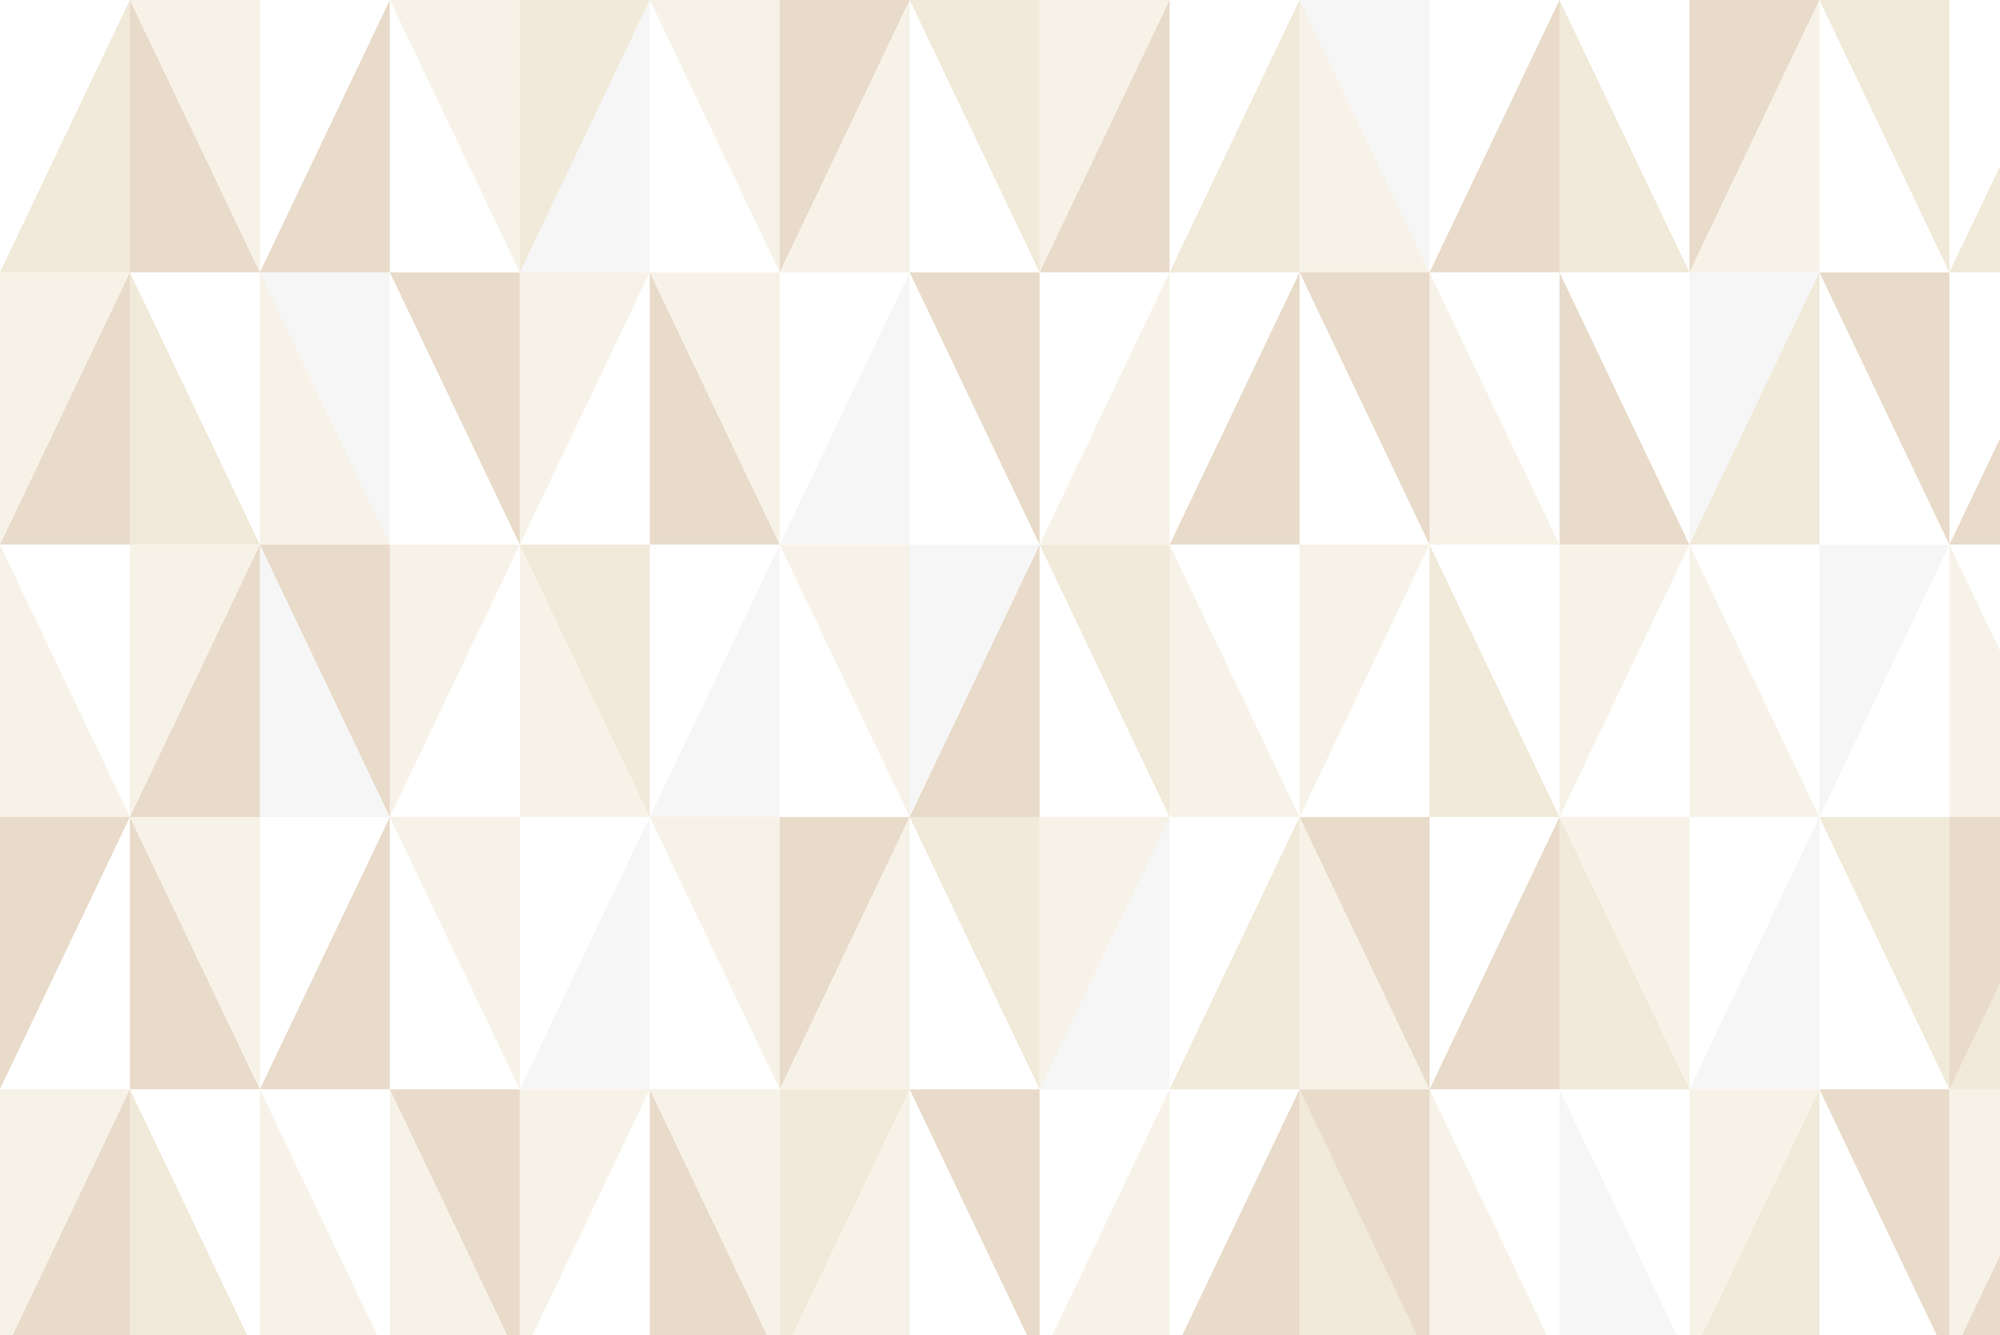             Design wall mural with small triangles grey on mother of pearl smooth nonwoven
        